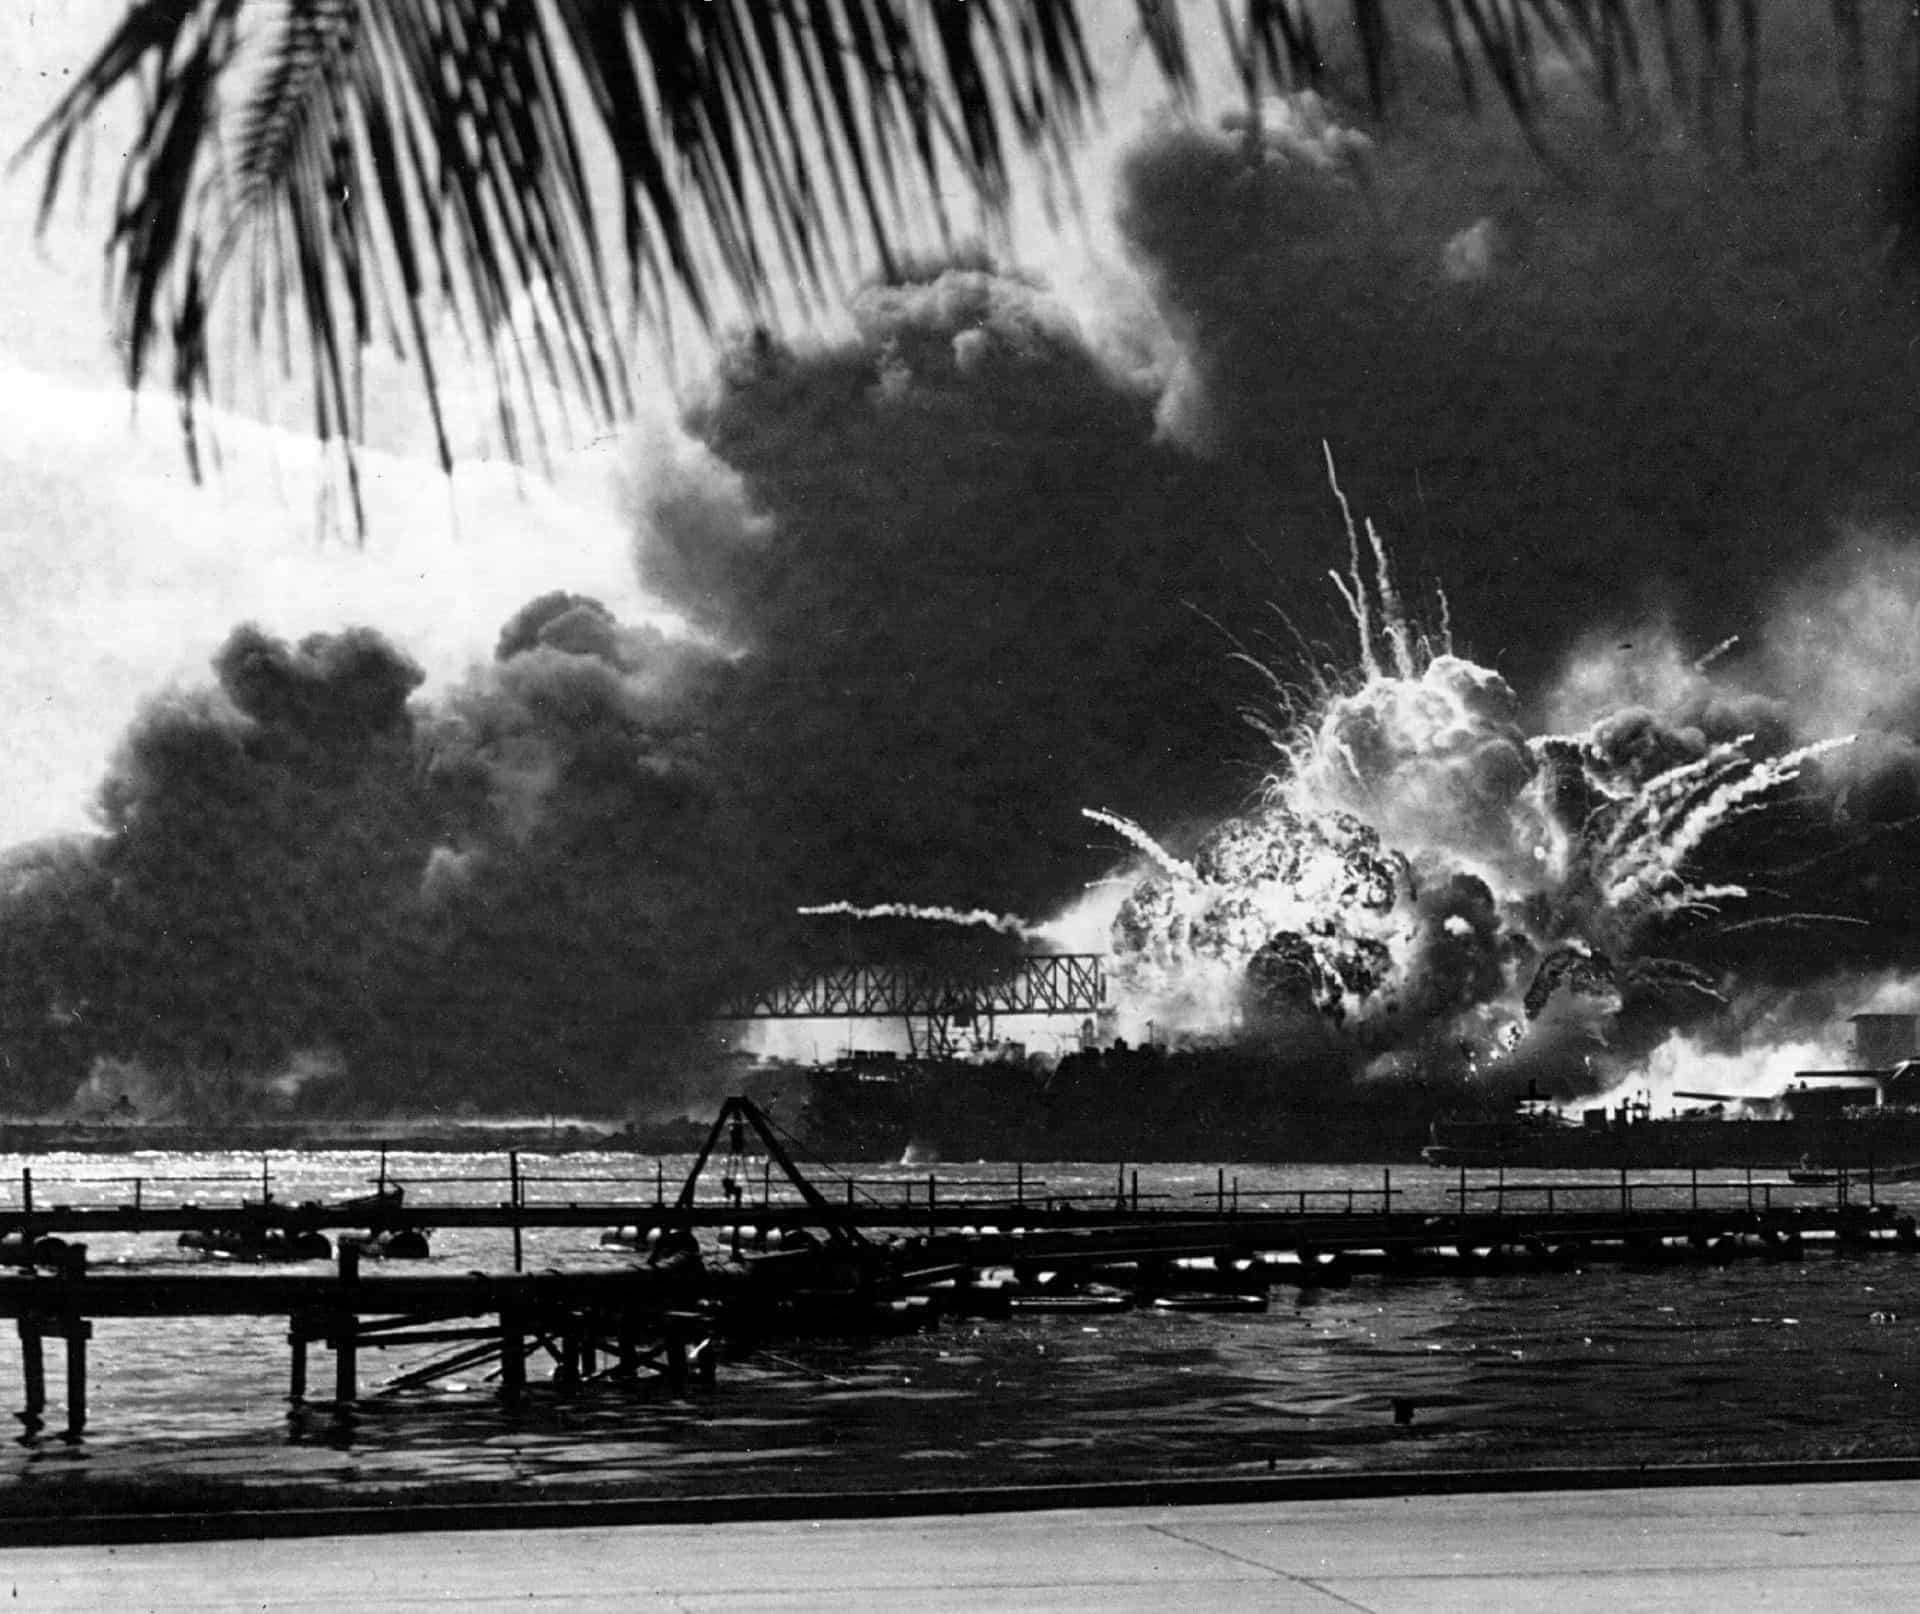 After the Pearl Harbor attack, Canada declared war on Japan before the United States.<p>You may also like:<a href="https://www.starsinsider.com/n/415732?utm_source=msn.com&utm_medium=display&utm_campaign=referral_description&utm_content=127835v1en-en"> Films that accurately and realistically portray war</a></p>